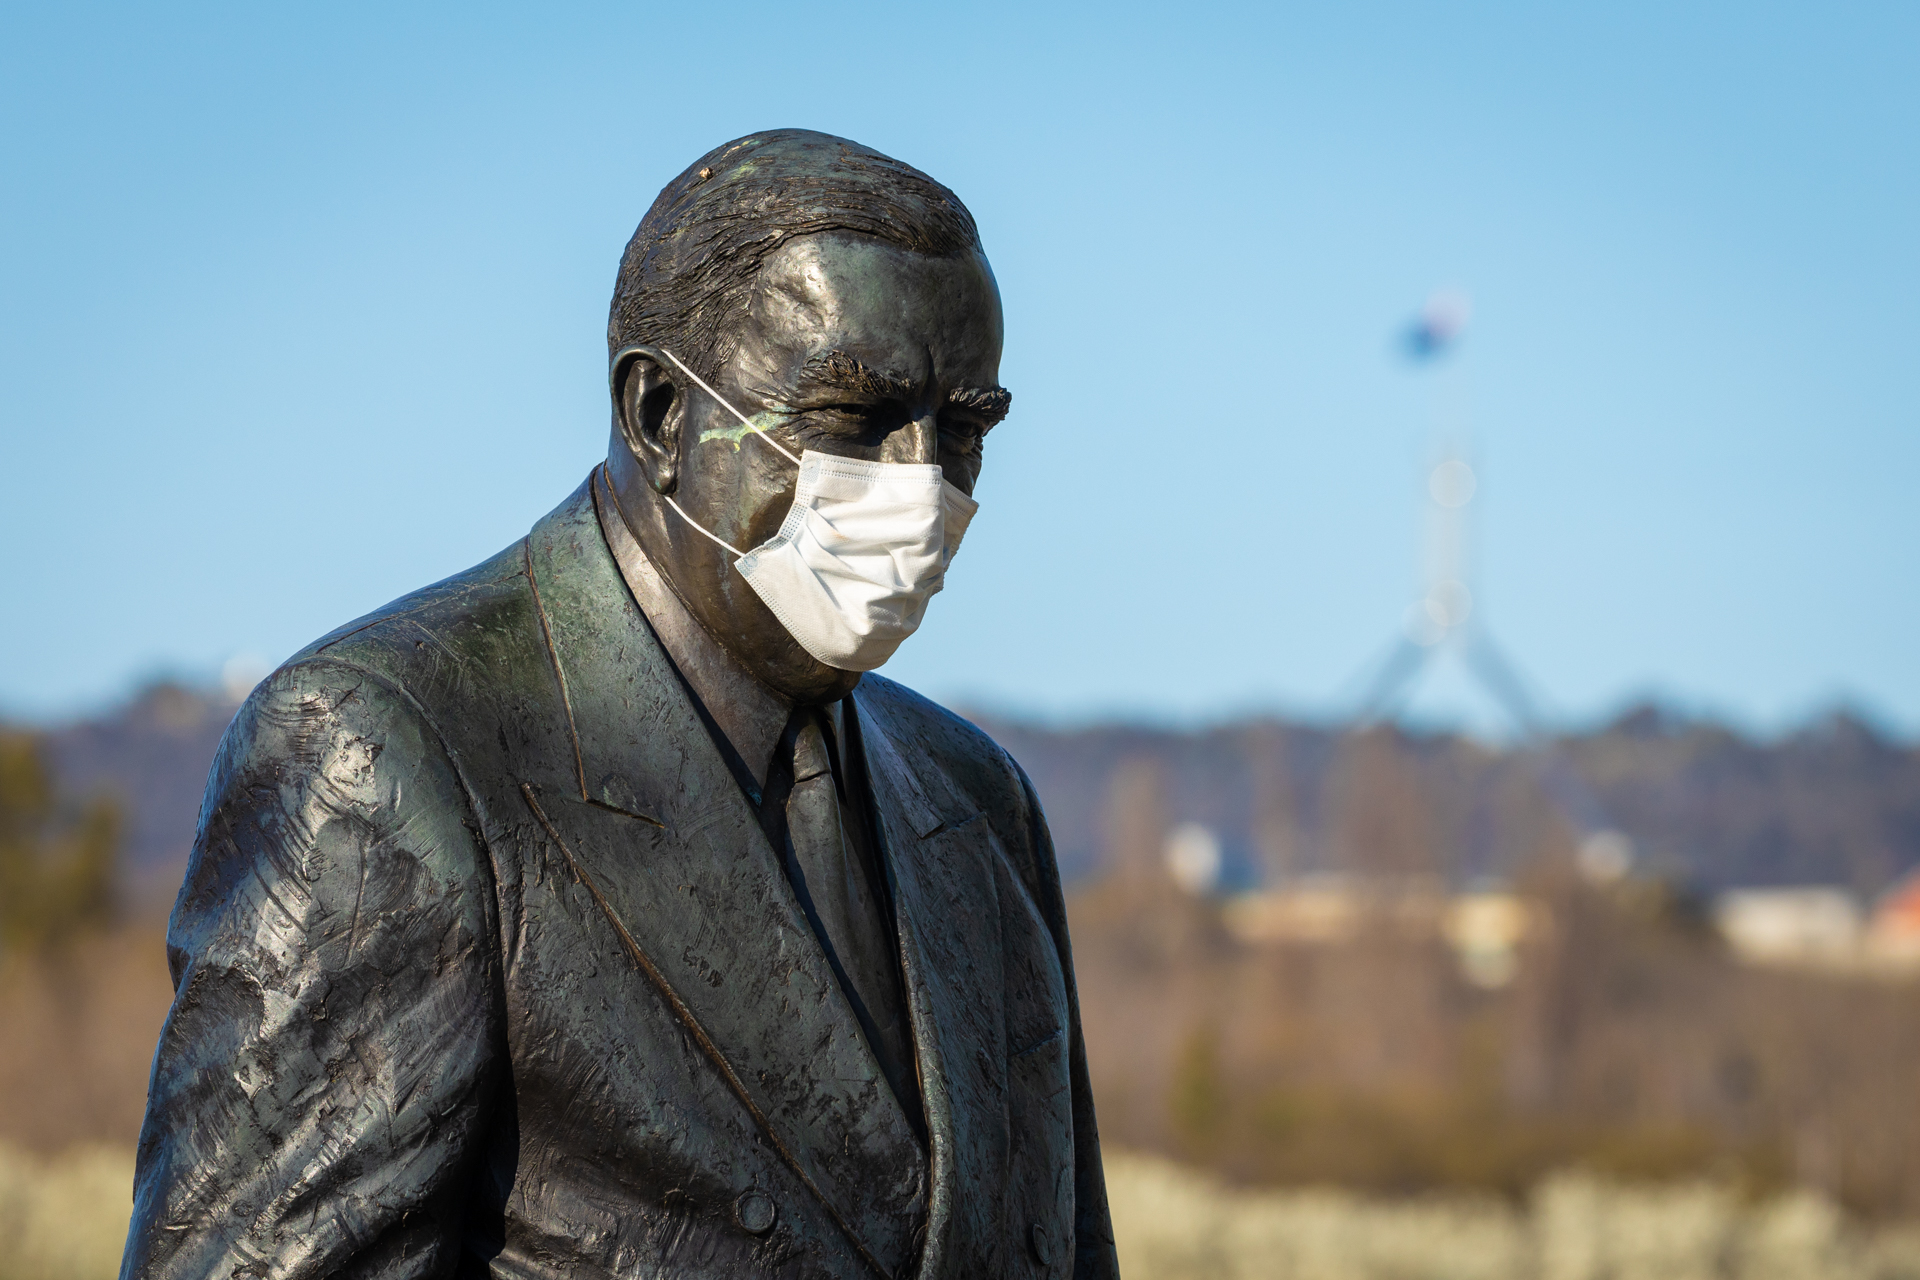 Face masks may stay for good, even after ACT COVID mandates wind down